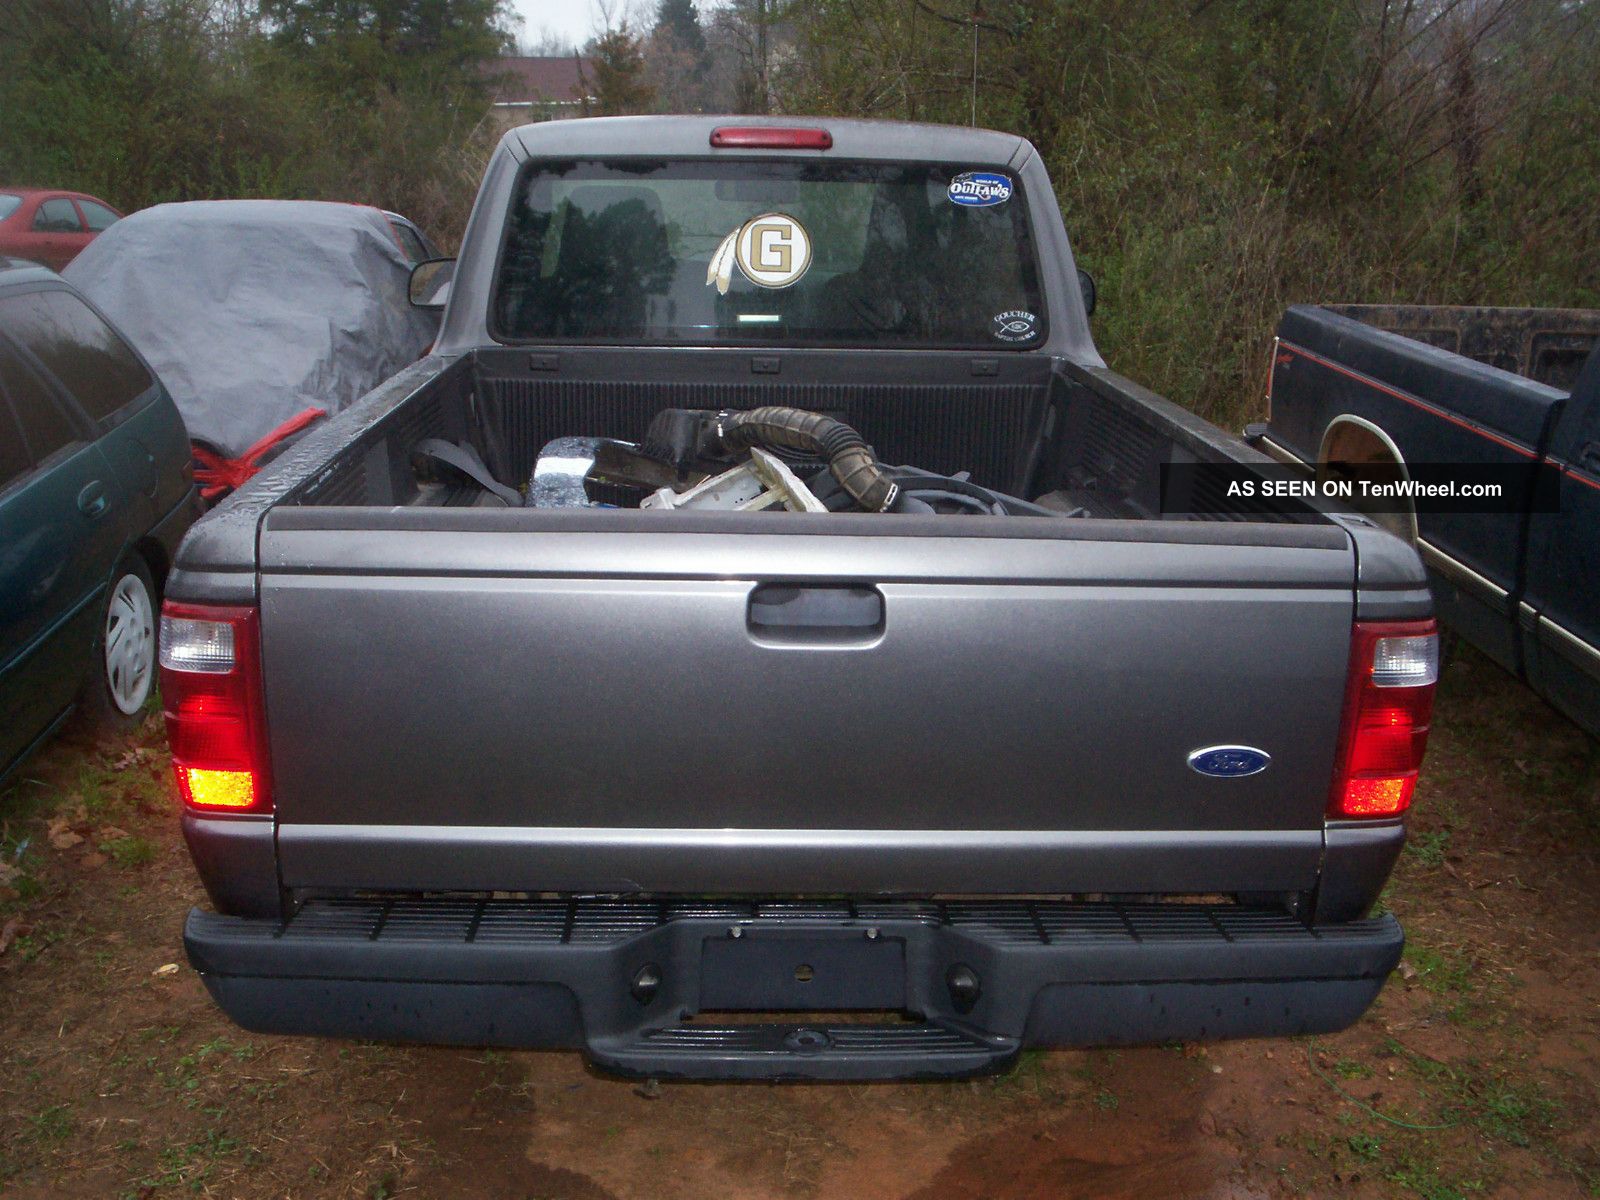 Ford ranger salvage repairable #3